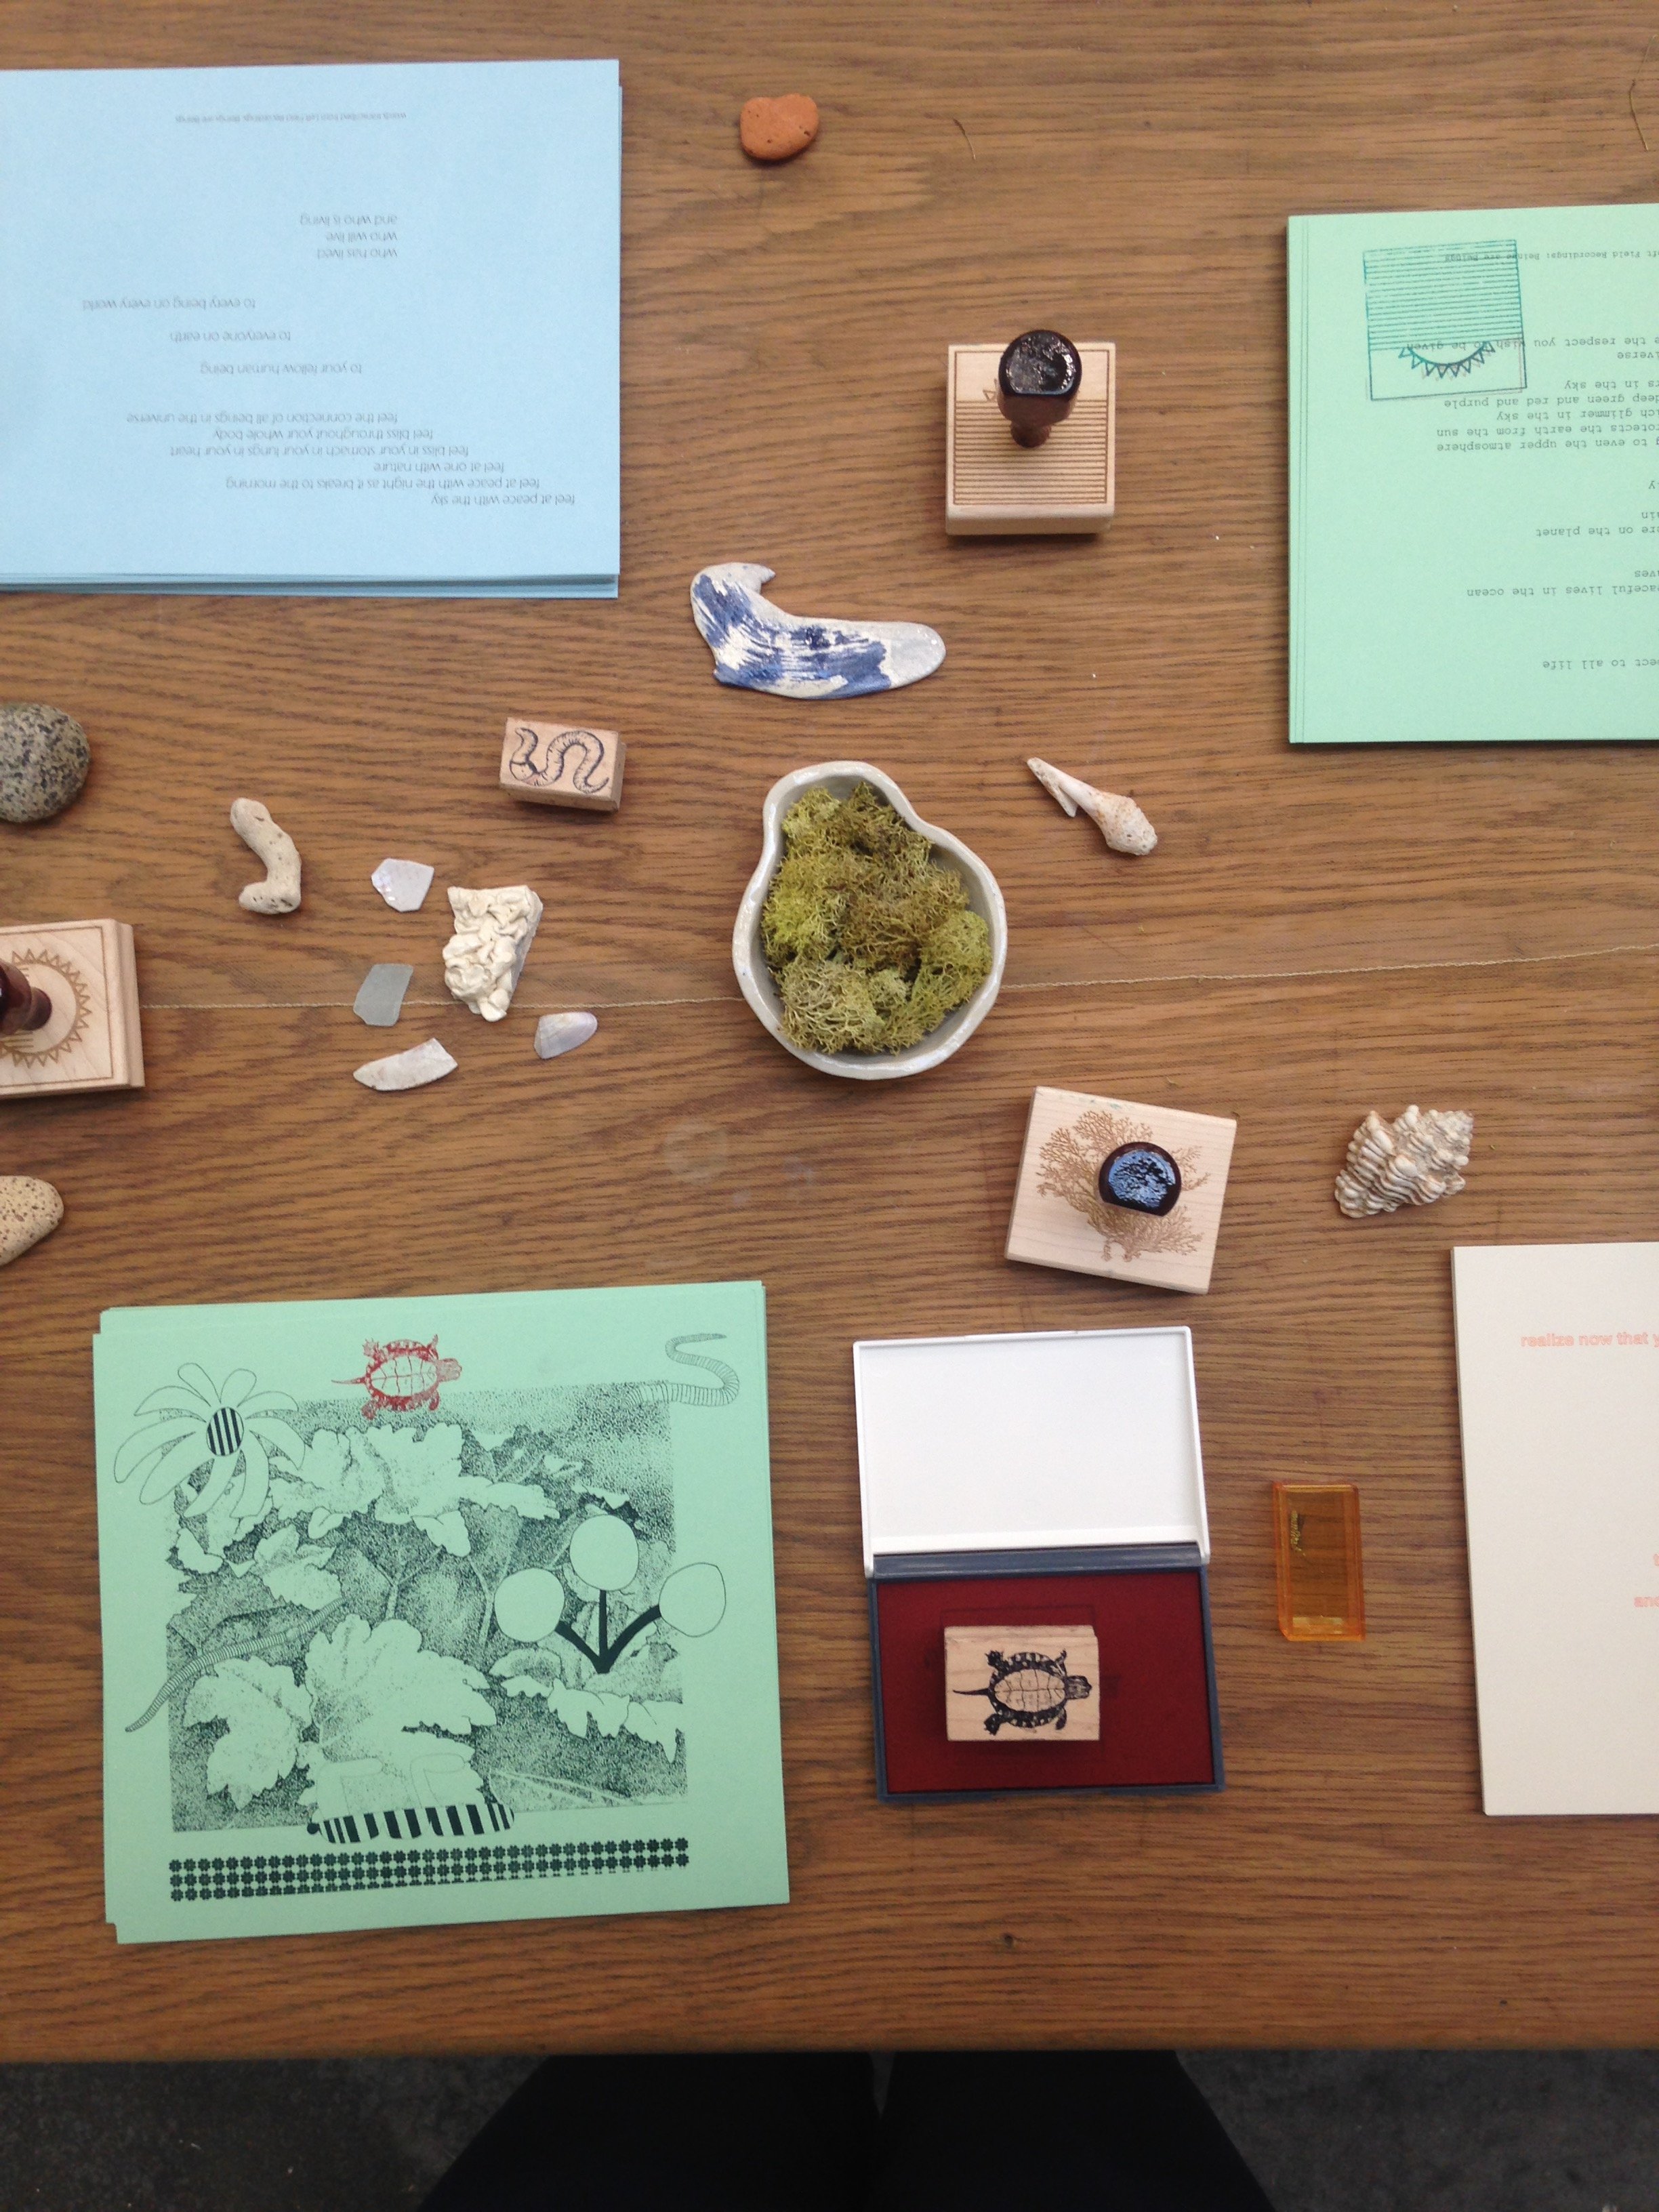  On some faraway beach  Collaboration with Eunice Luk  Screenprinted wallpaper, bugs video installation, rubber stamps, stamp pads, free risograph art prints, ceramics, mesh netting, found stones, vegetation and shells  at Emily Carr University for V